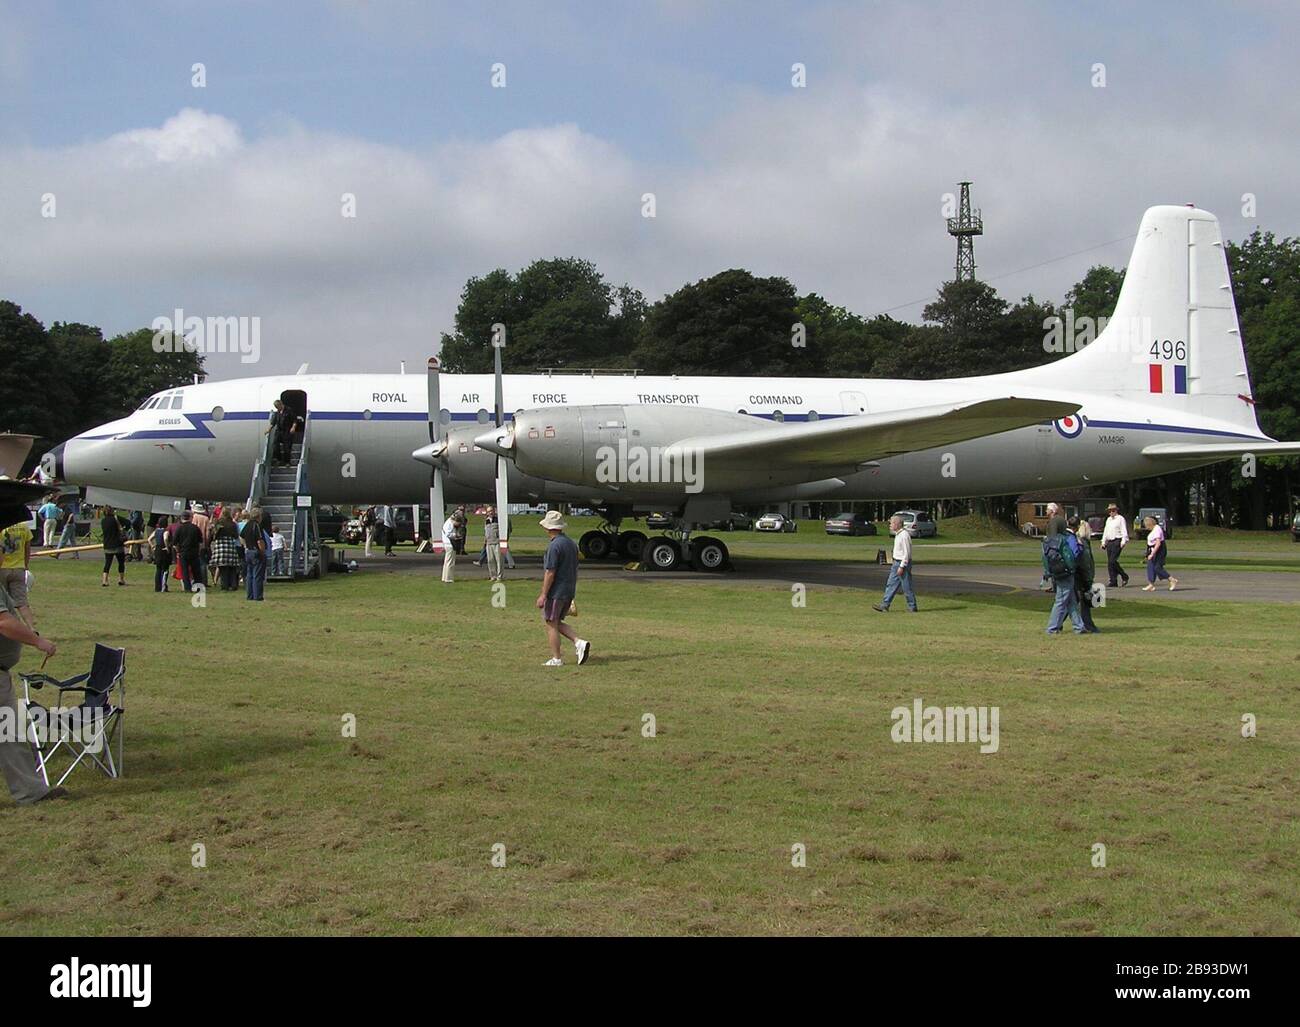 "English: Ex-RAF Transport Command Bristol Britannia ‘’Regulus‘’ (RAF serial XM496) is being restored by the Bristol Britannia Preservation Society at Kemble Airport, Gloucestershire, England. Built in Belfast, Northern Ireland, first flight 24th August 1960, delivered to the RAF 17th September 1960, withdrawn from RAF service 27th October 1975.  The aircraft was then used by several airlines until being brought to Kemble and painted in RAF colours. The aircraft will be preserved as a ground exhibit, there are no plans to ever fly it.; September 2007 at Kemble Open Day,; Own work; Adrian Pings Stock Photo